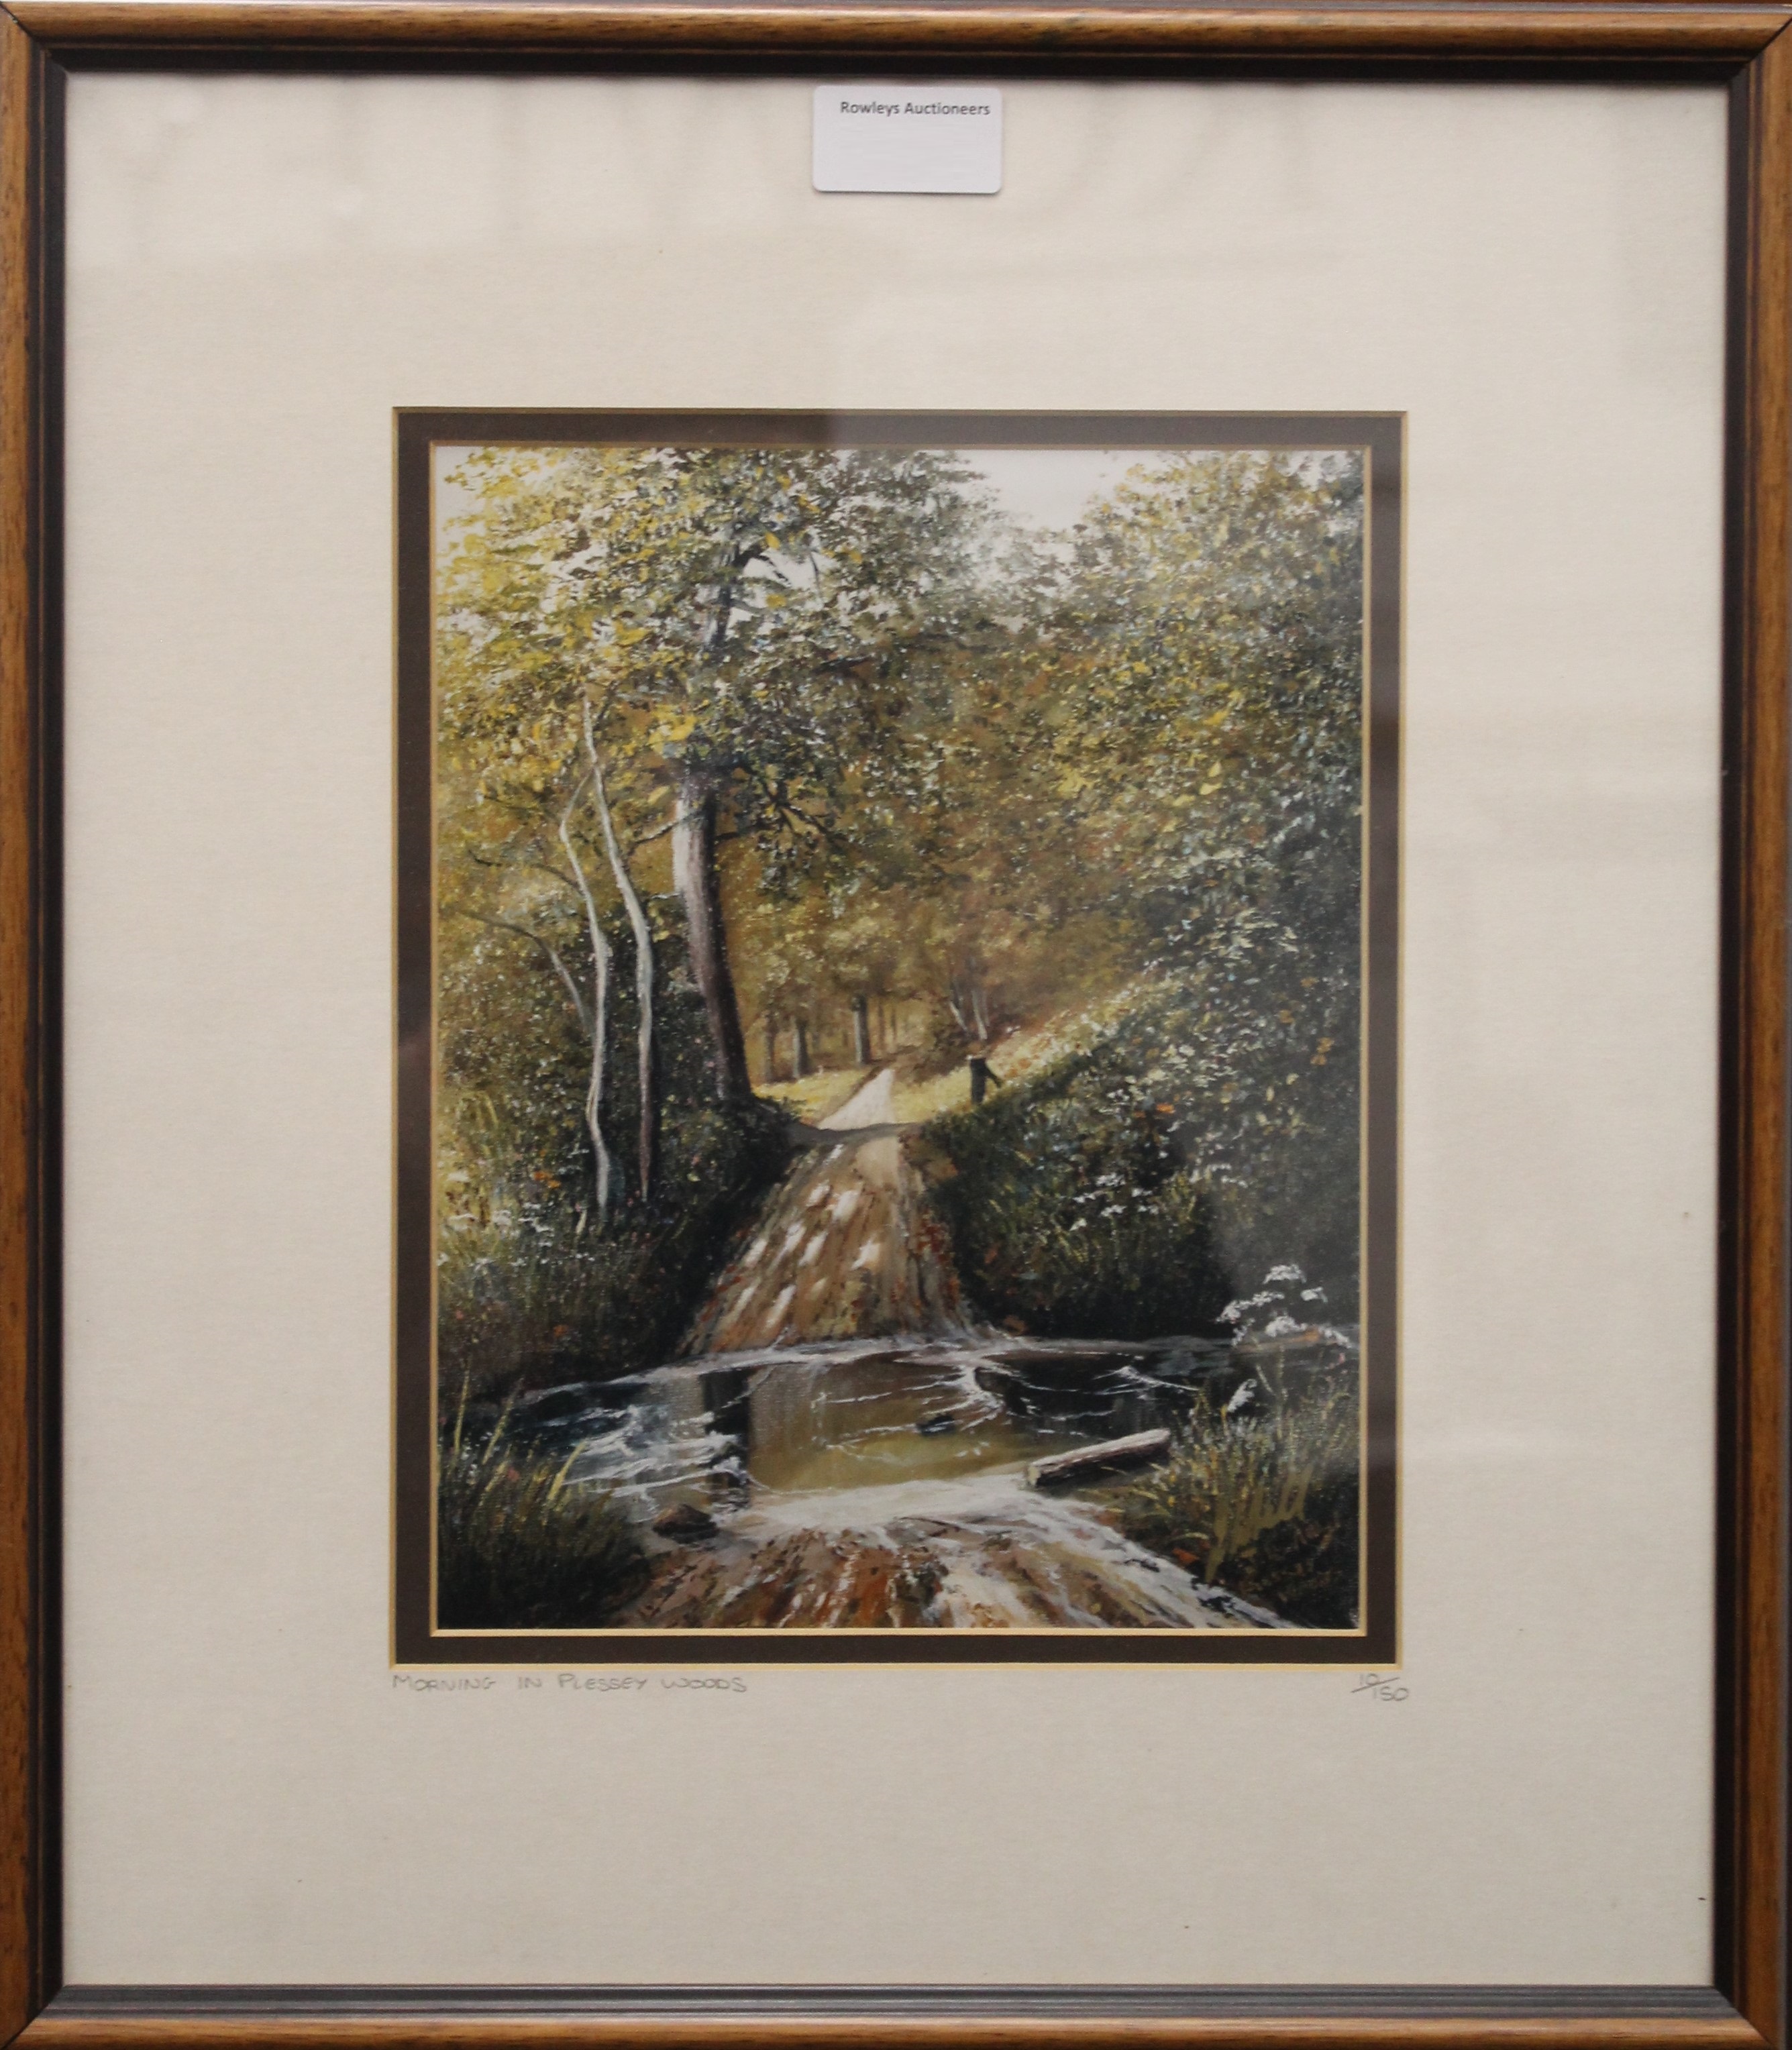 J L AULD, Morning in Plessey Woods, limited edition print, numbered 10/150, framed and glazed. 18. - Image 2 of 2